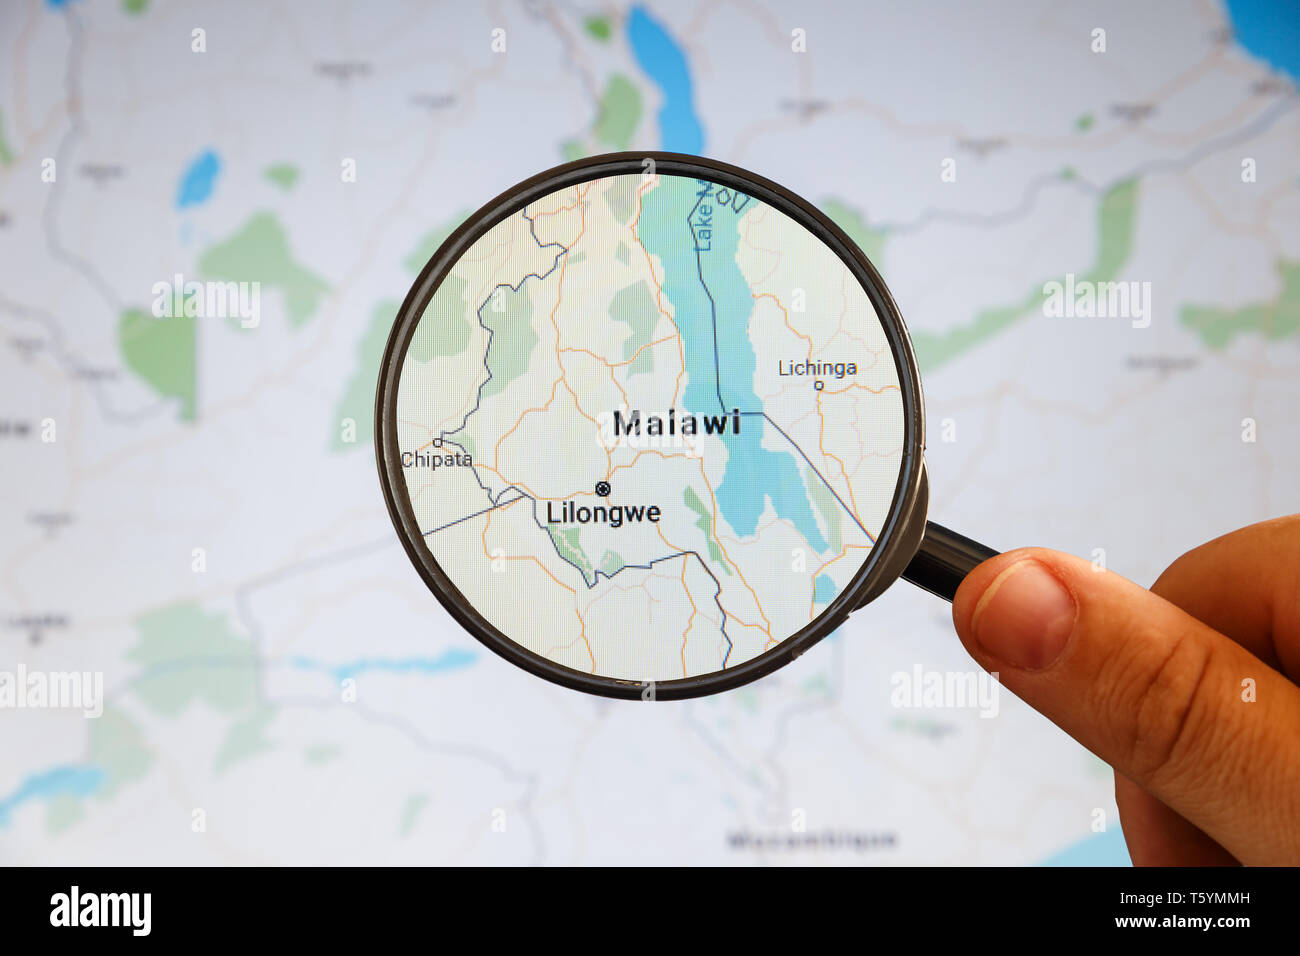 Lilongwe, Malawi. Political map. City visualization illustrative concept on display screen through magnifying glass in the hand. Stock Photo